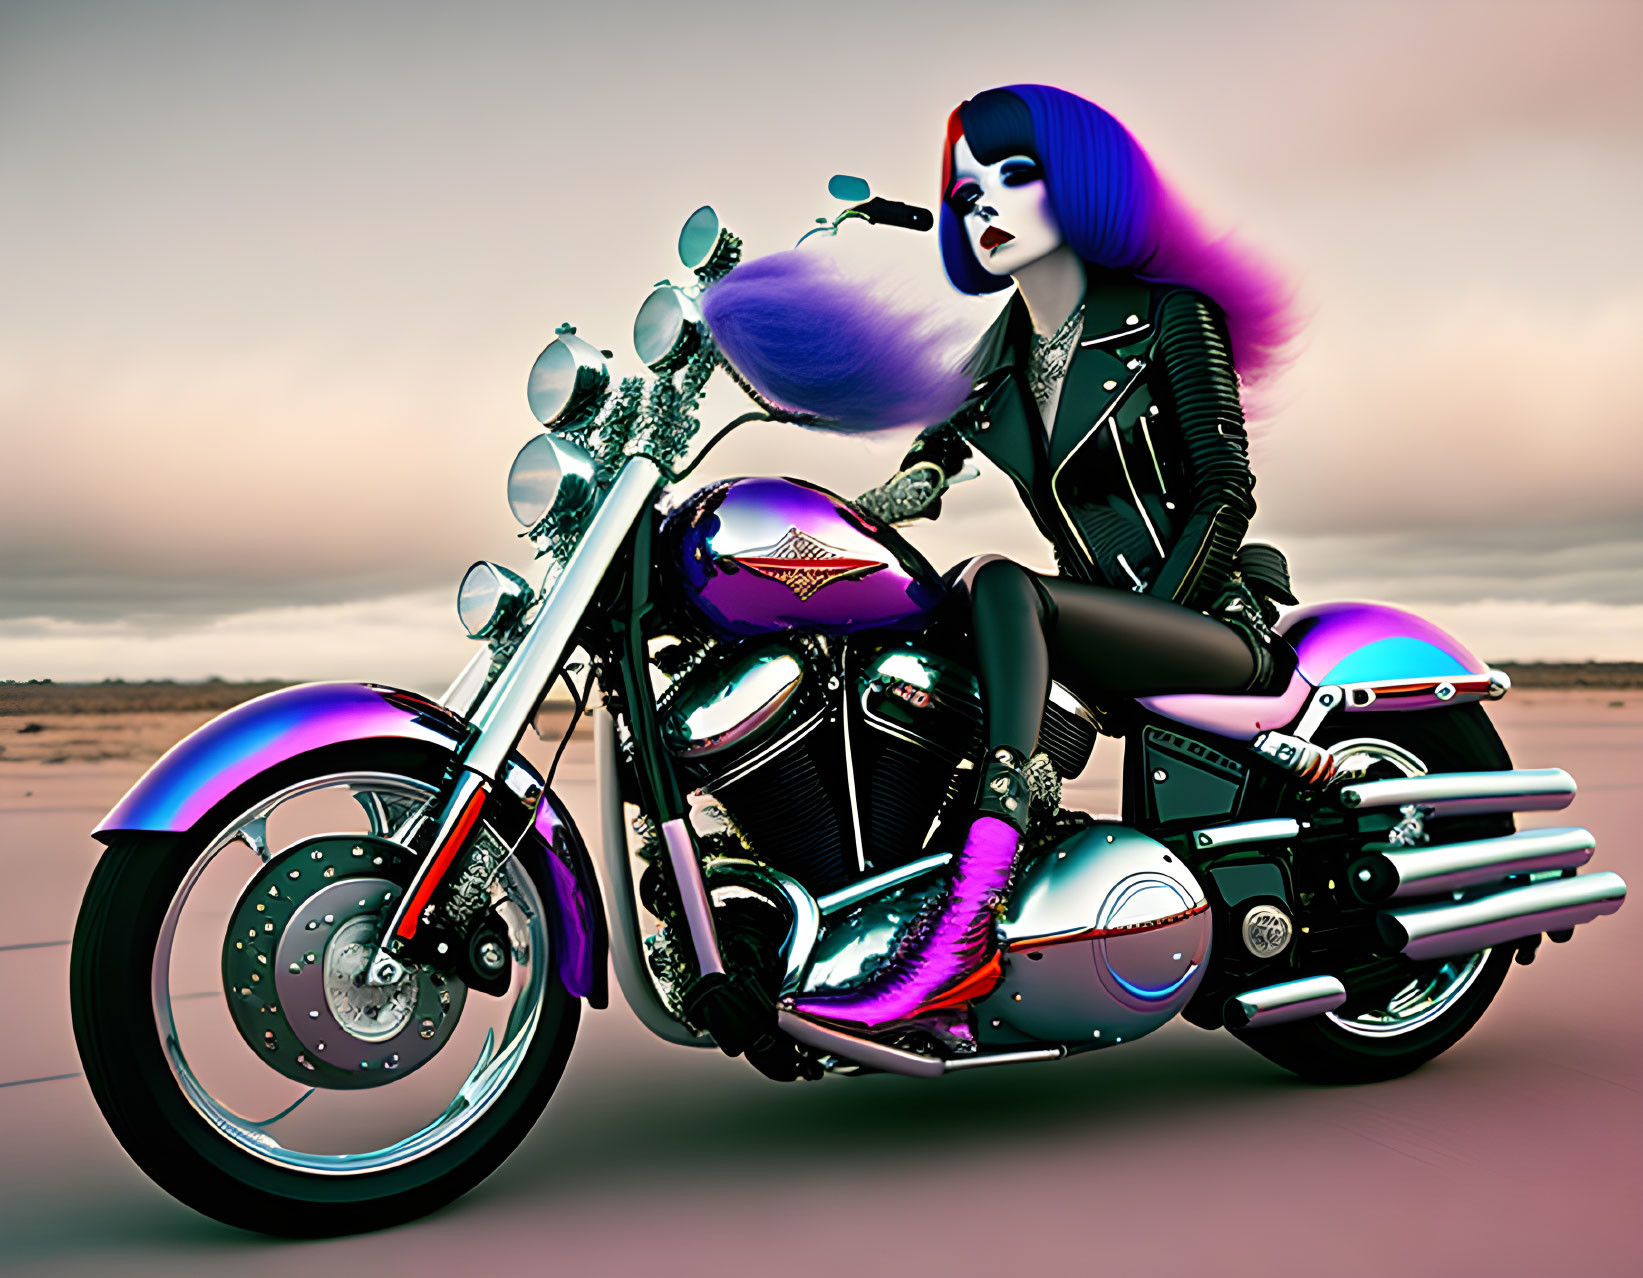 Illustration of woman with blue and purple hair on chromatic motorcycle under pastel sky